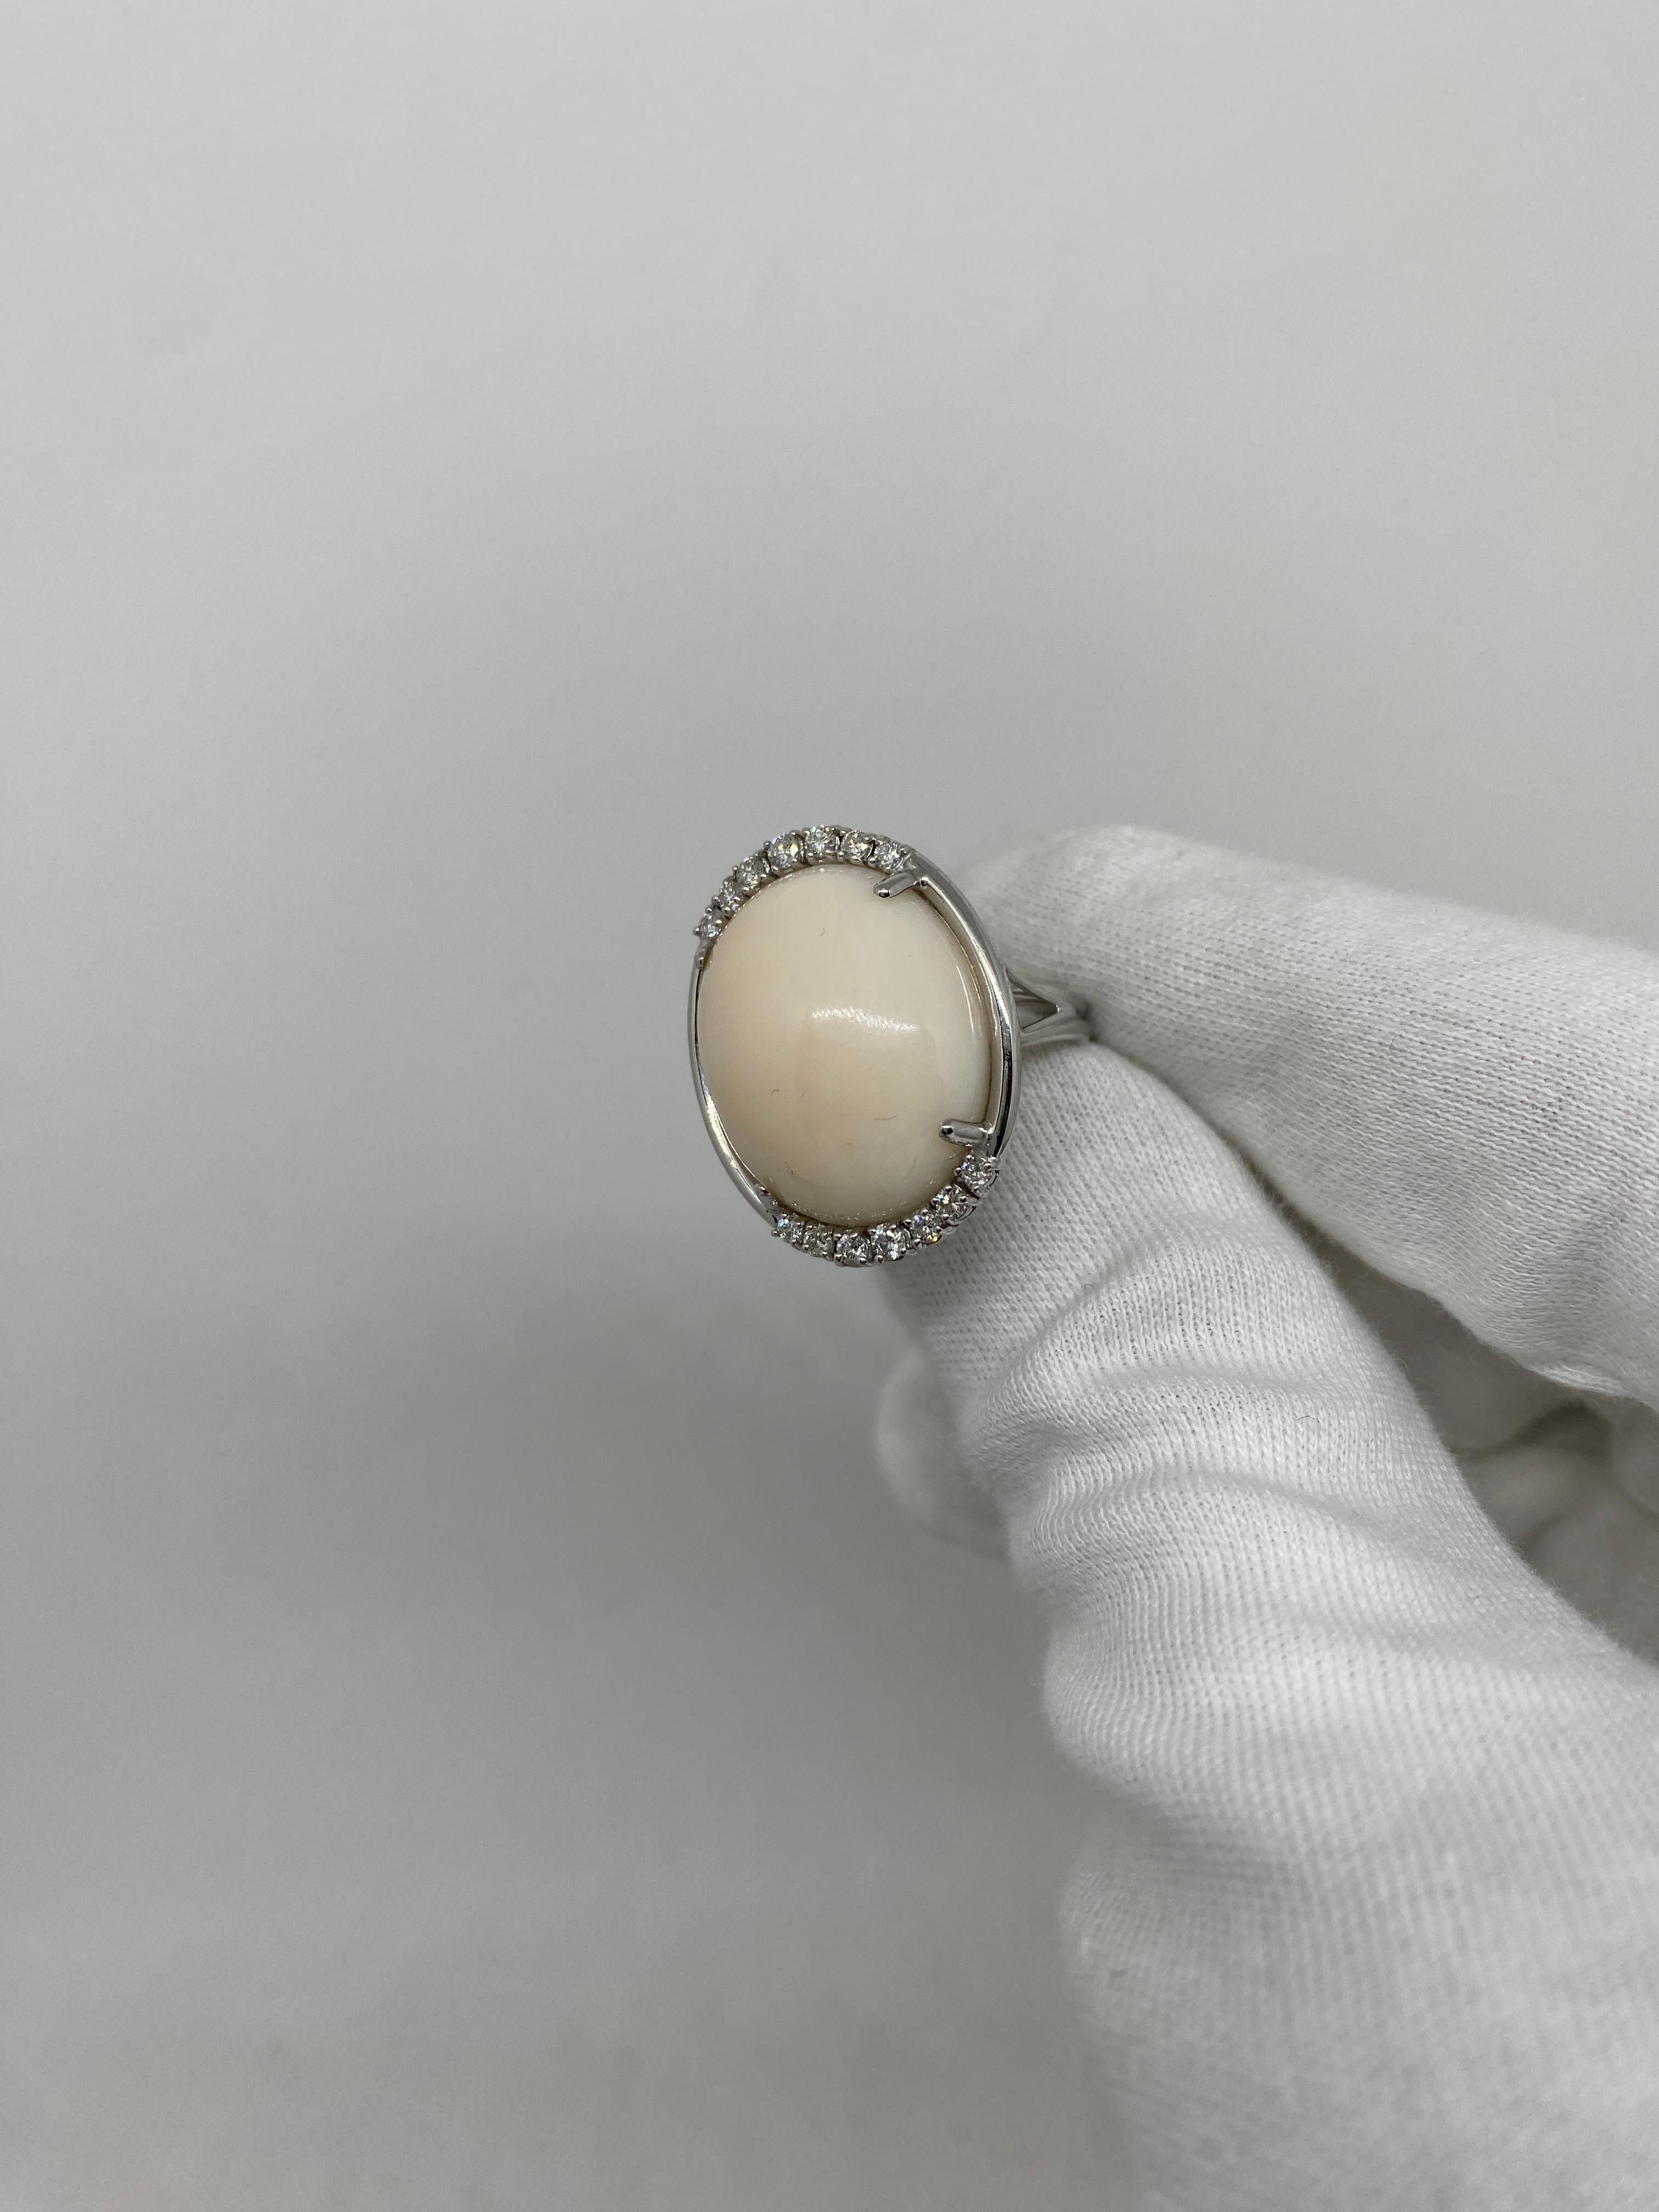 Ring made of 18kt white gold with angel skin coral and natural white brilliant-cut diamonds

Welcome to our jewelry collection, where every piece tells a story of timeless elegance and unparalleled craftsmanship. As a family-run business in Italy